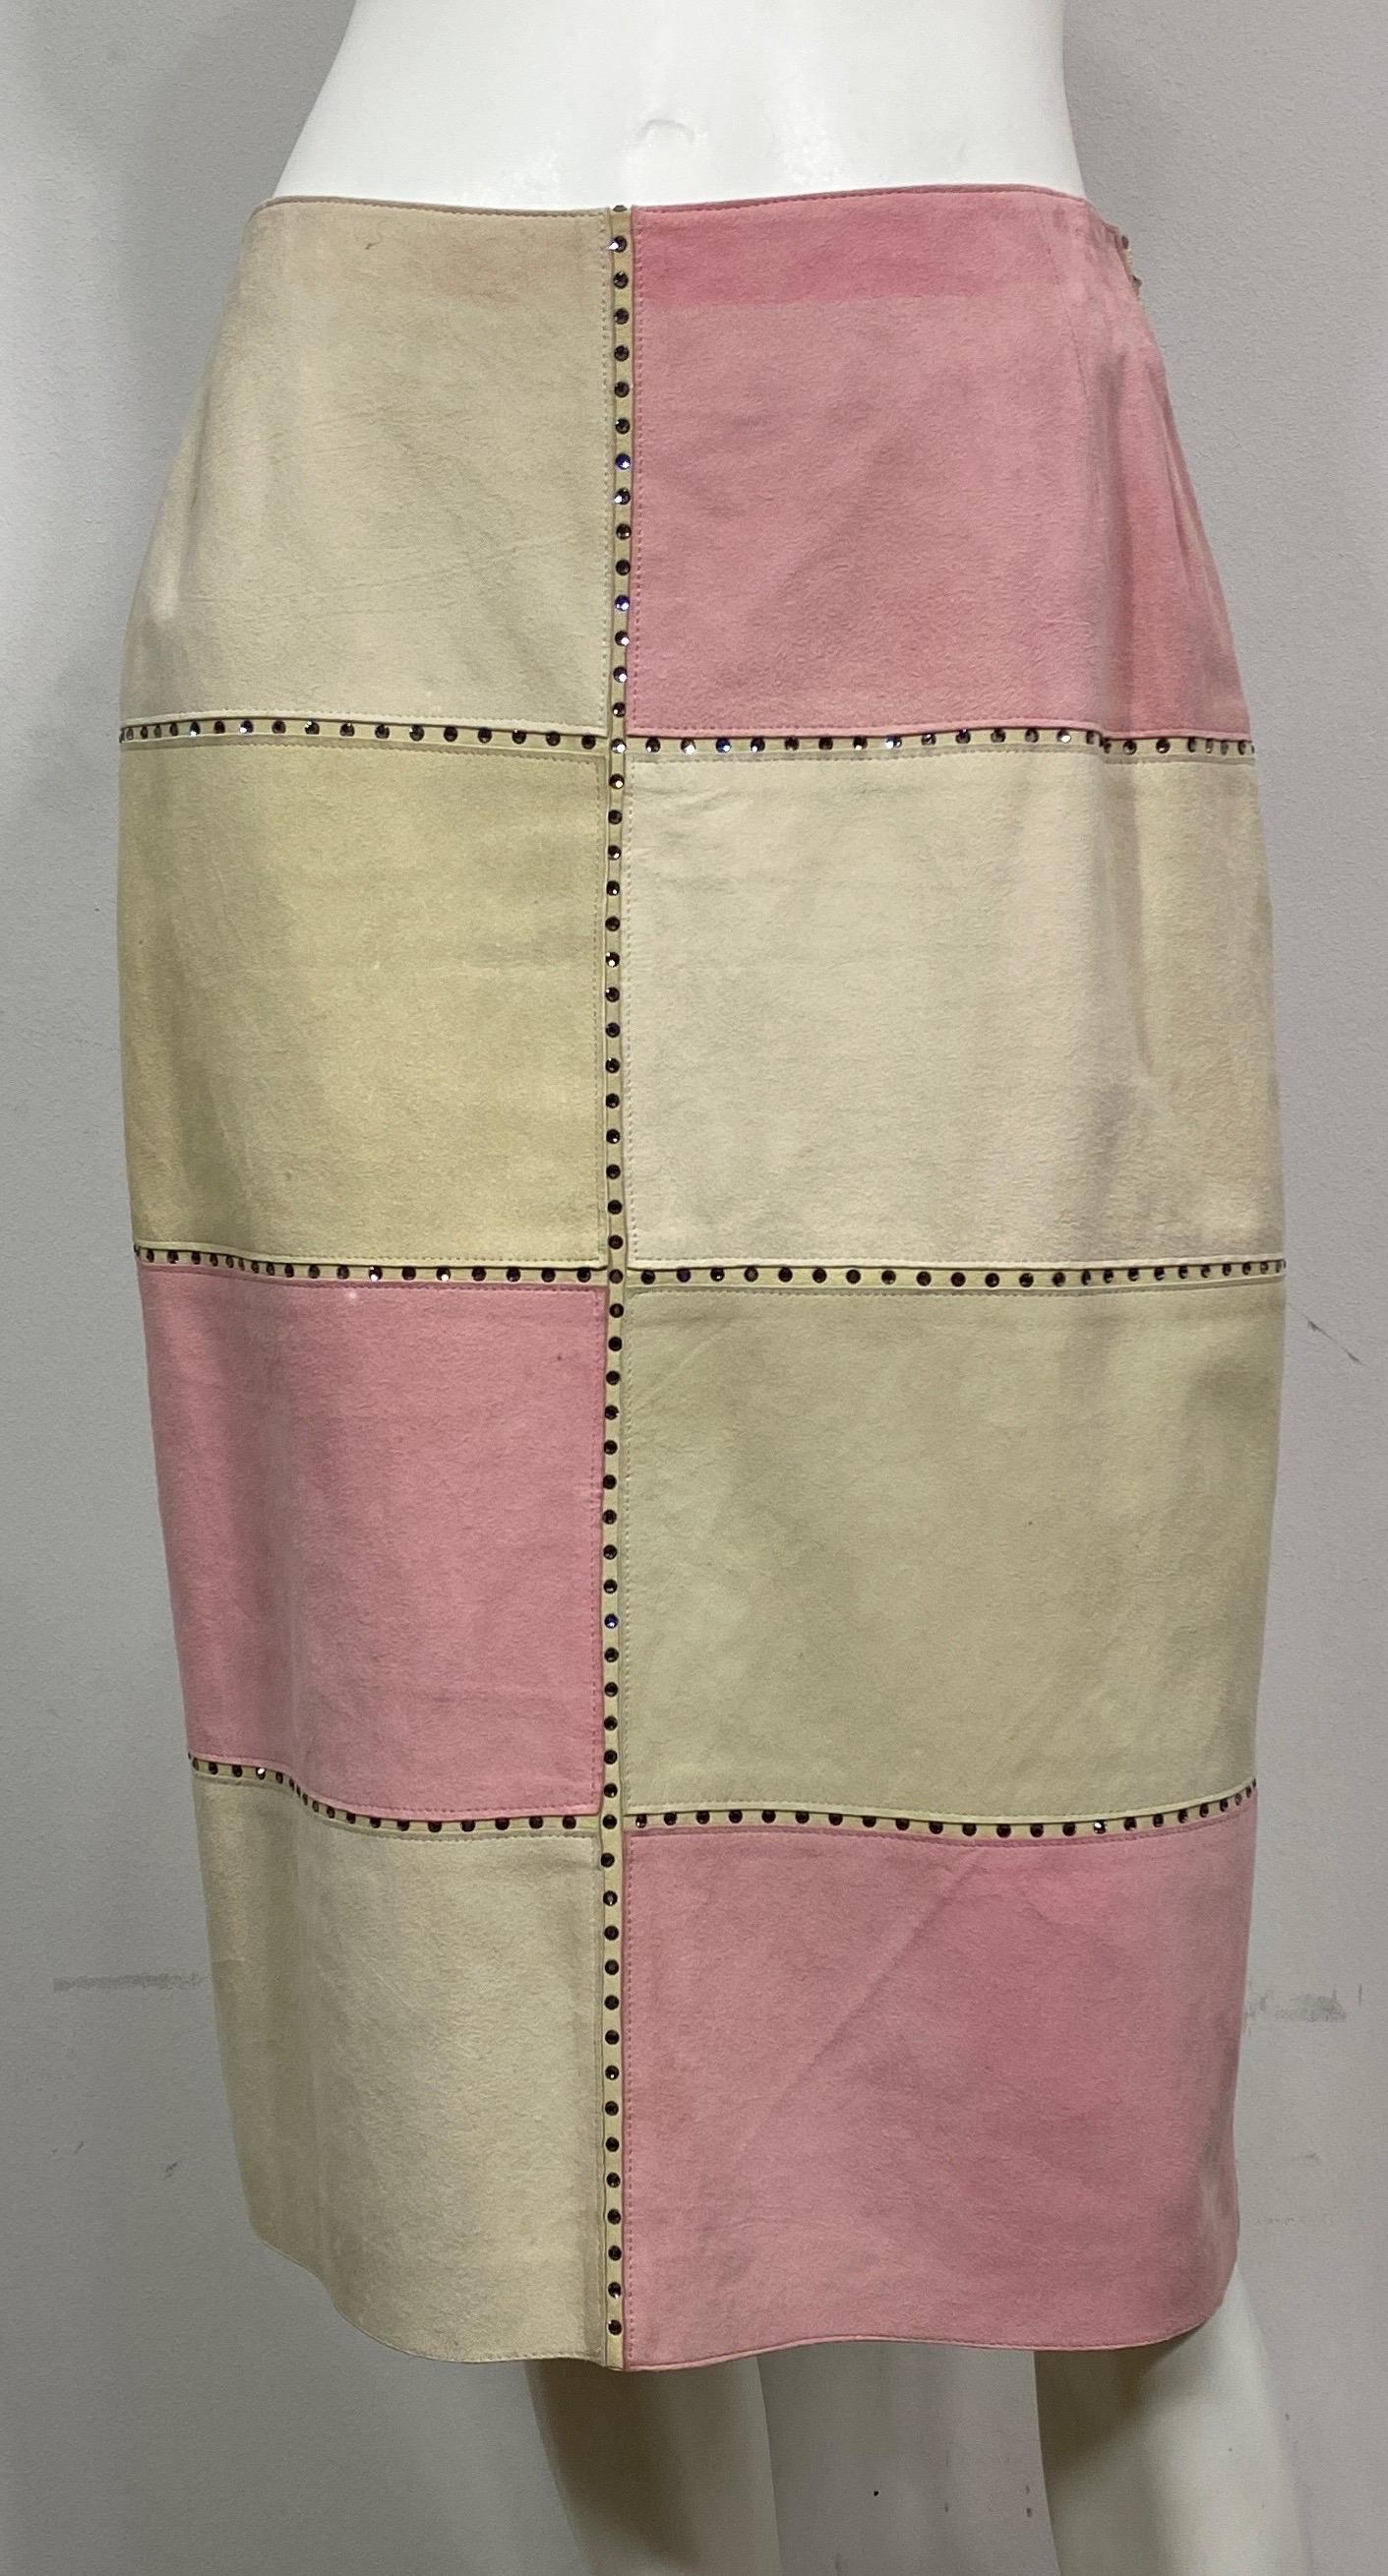 Valentino 2000 Autumn Collection Tan and Rose Patchwork Lambskin Skirt-Size 10. This soft leather patchwork skirt has earth tone Swarovski crystals forming a border around the 9” wide by 6” high patchwork lambskin suede leather pieces that alternate